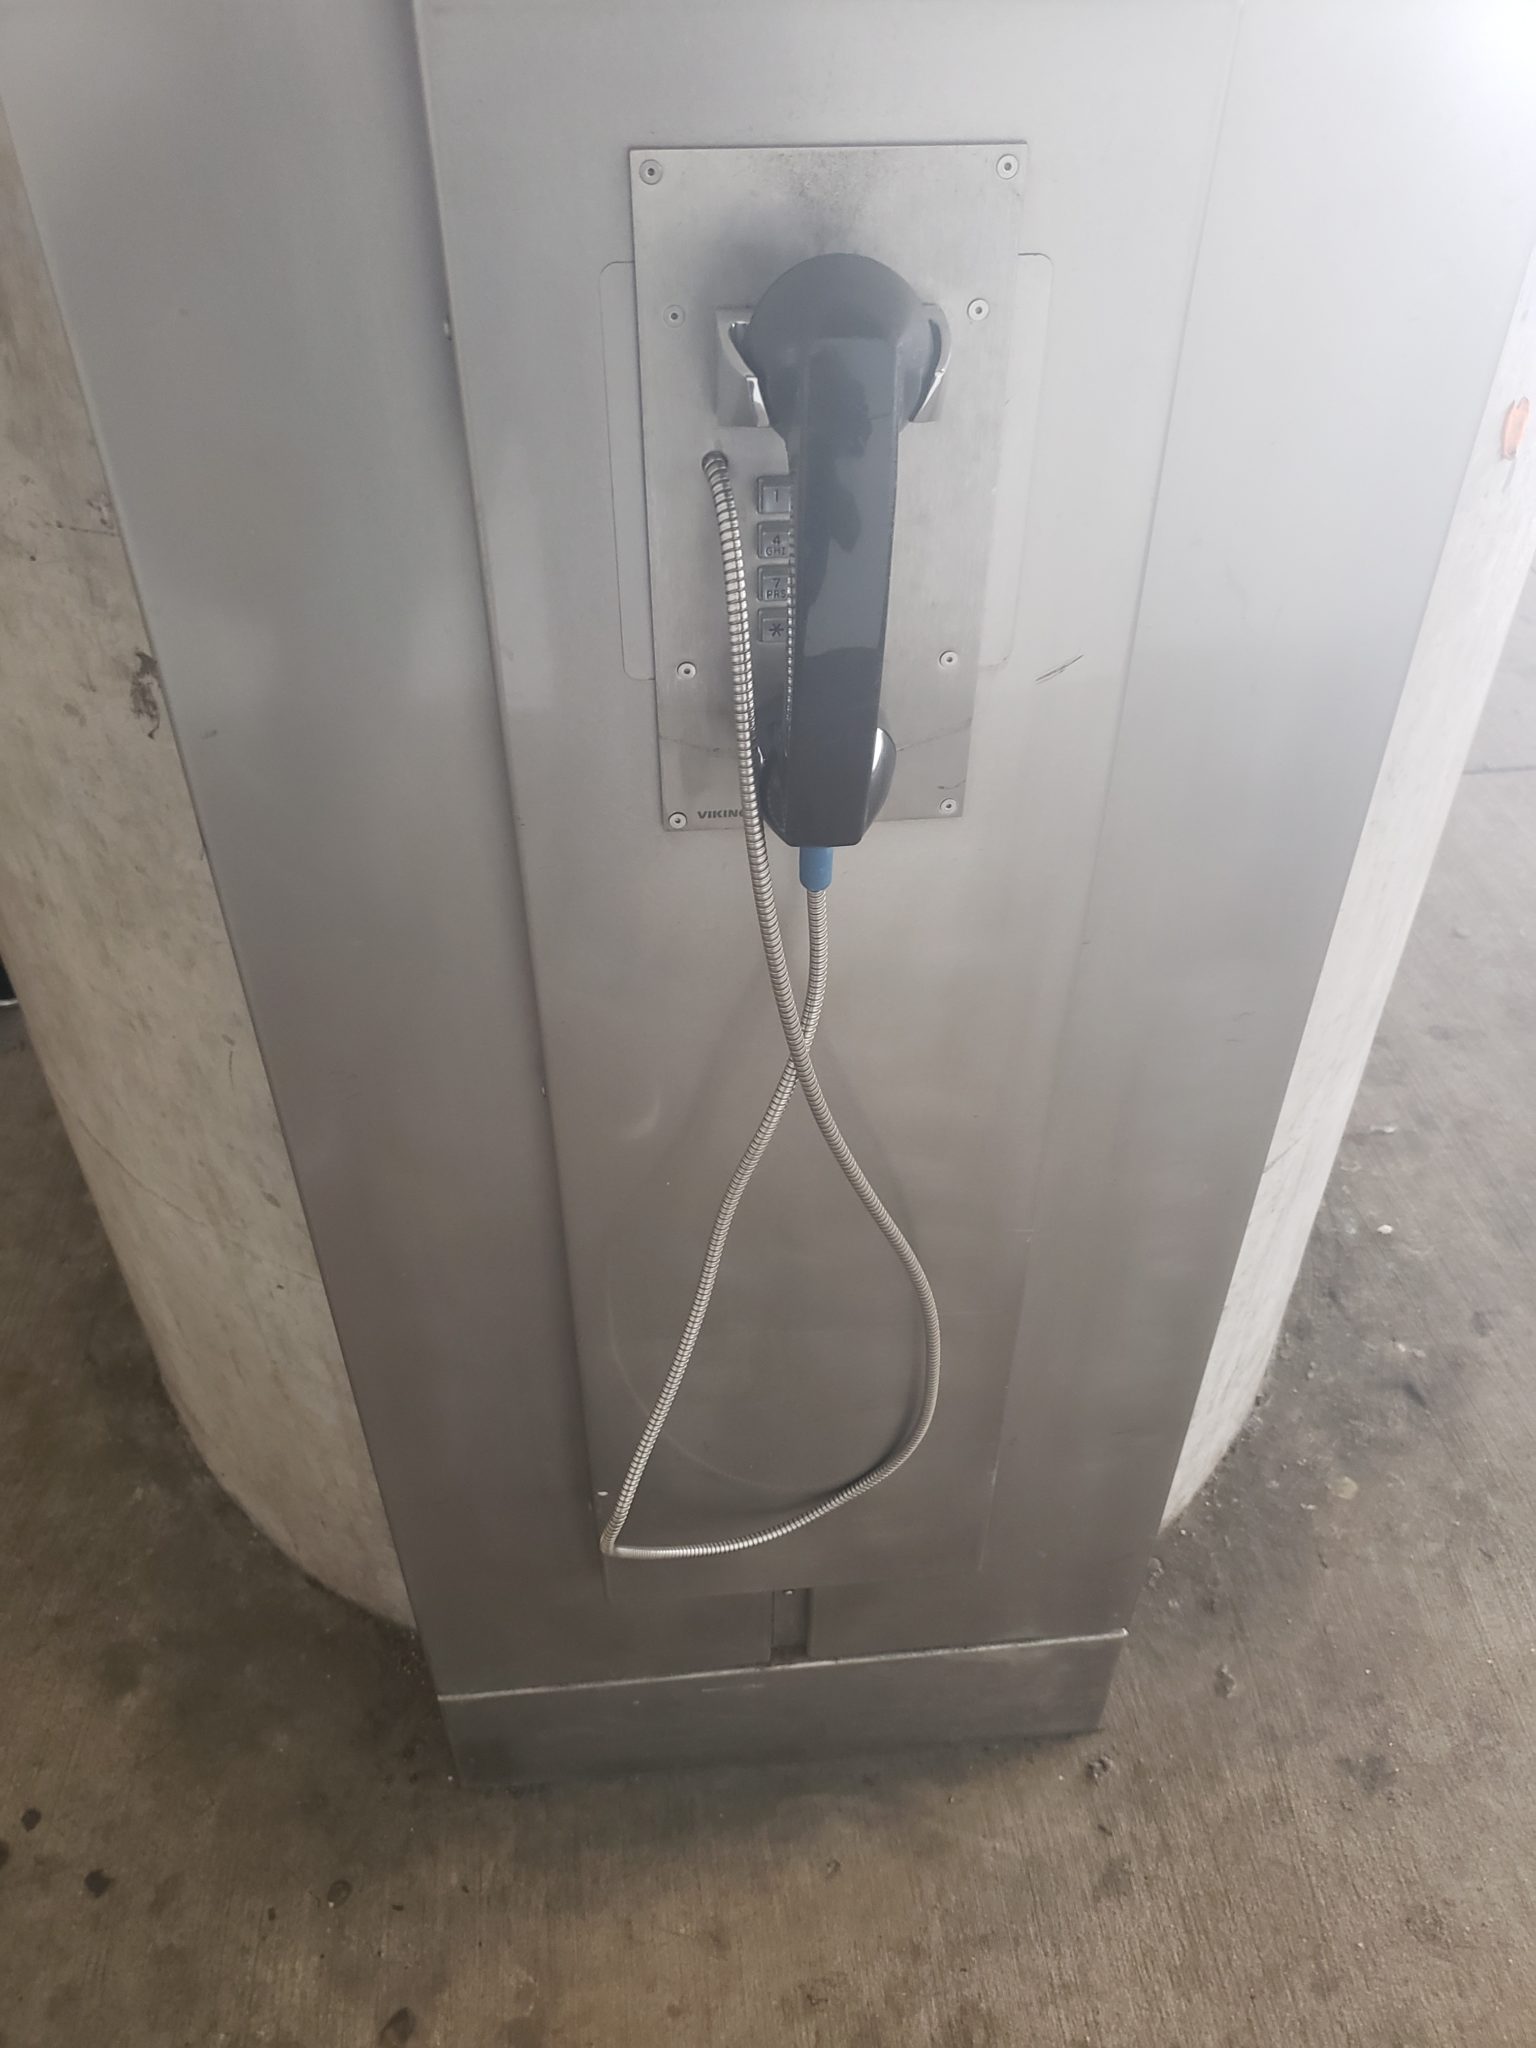 a telephone booth with a cord attached to it